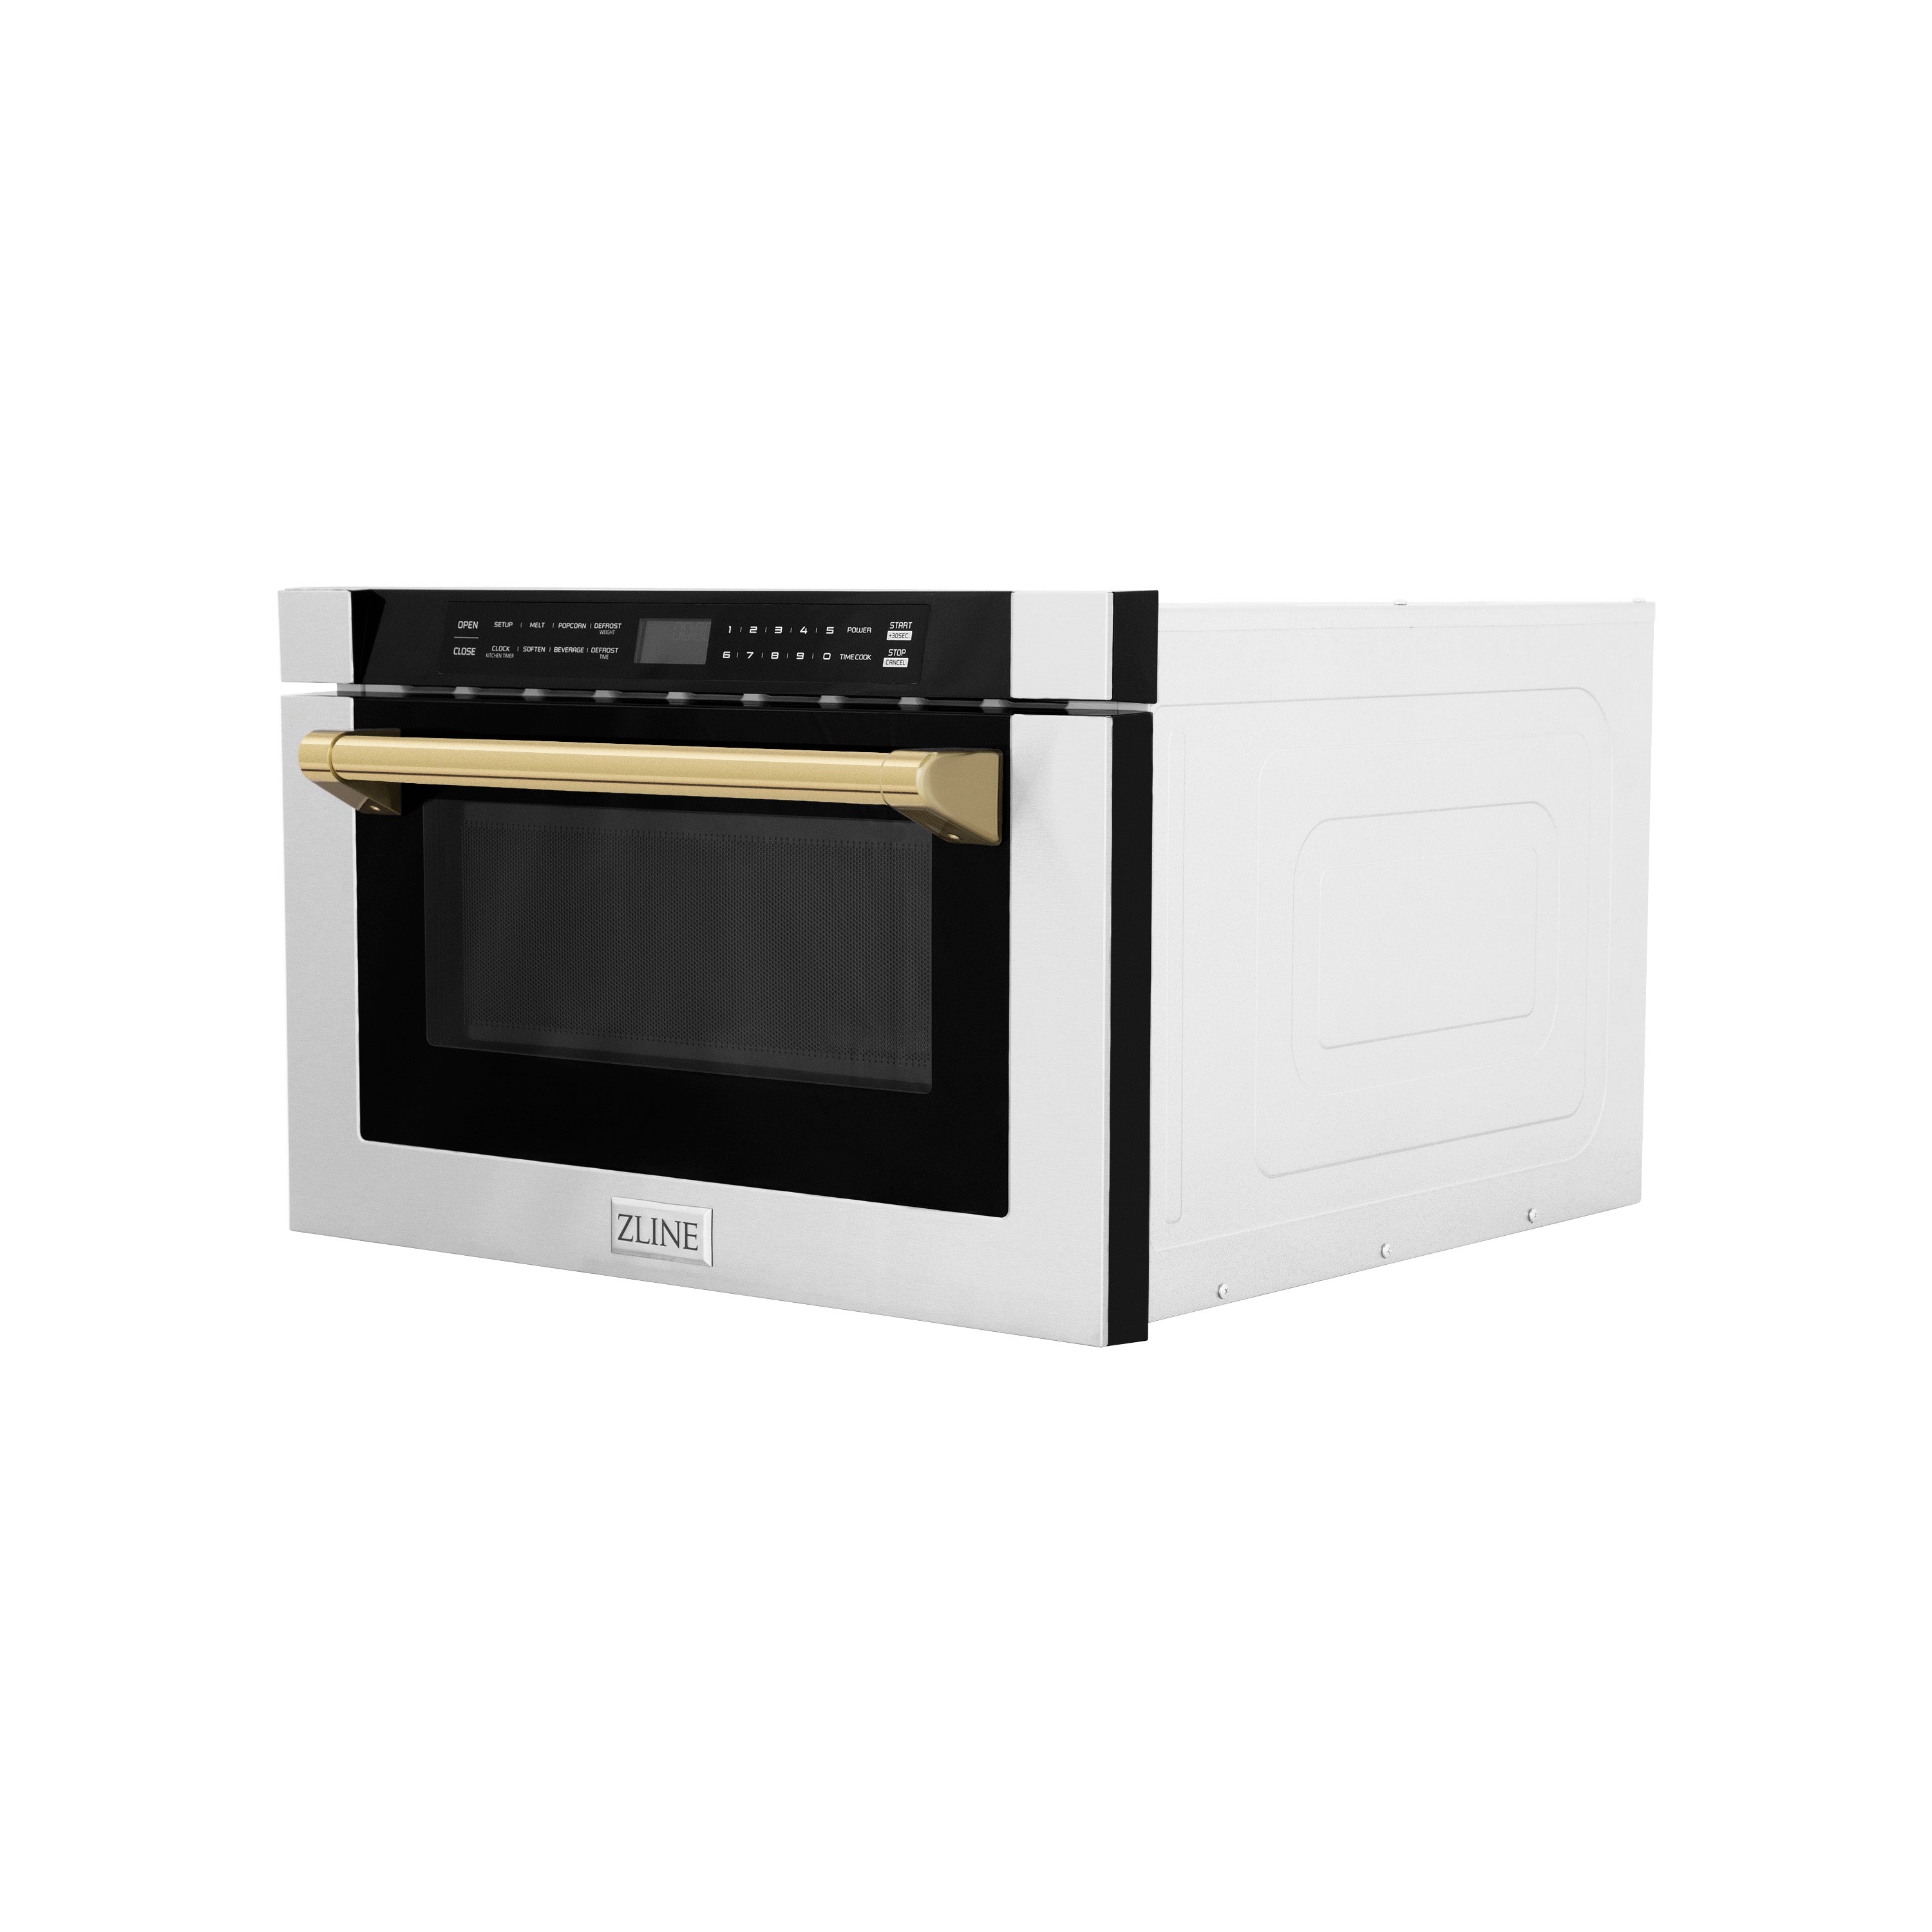 ZLINE Autograph Edition 24" 1.2 cu. ft. Built-in Microwave Drawer with a Traditional Handle in Stainless Steel and Polished Polished Gold Accents